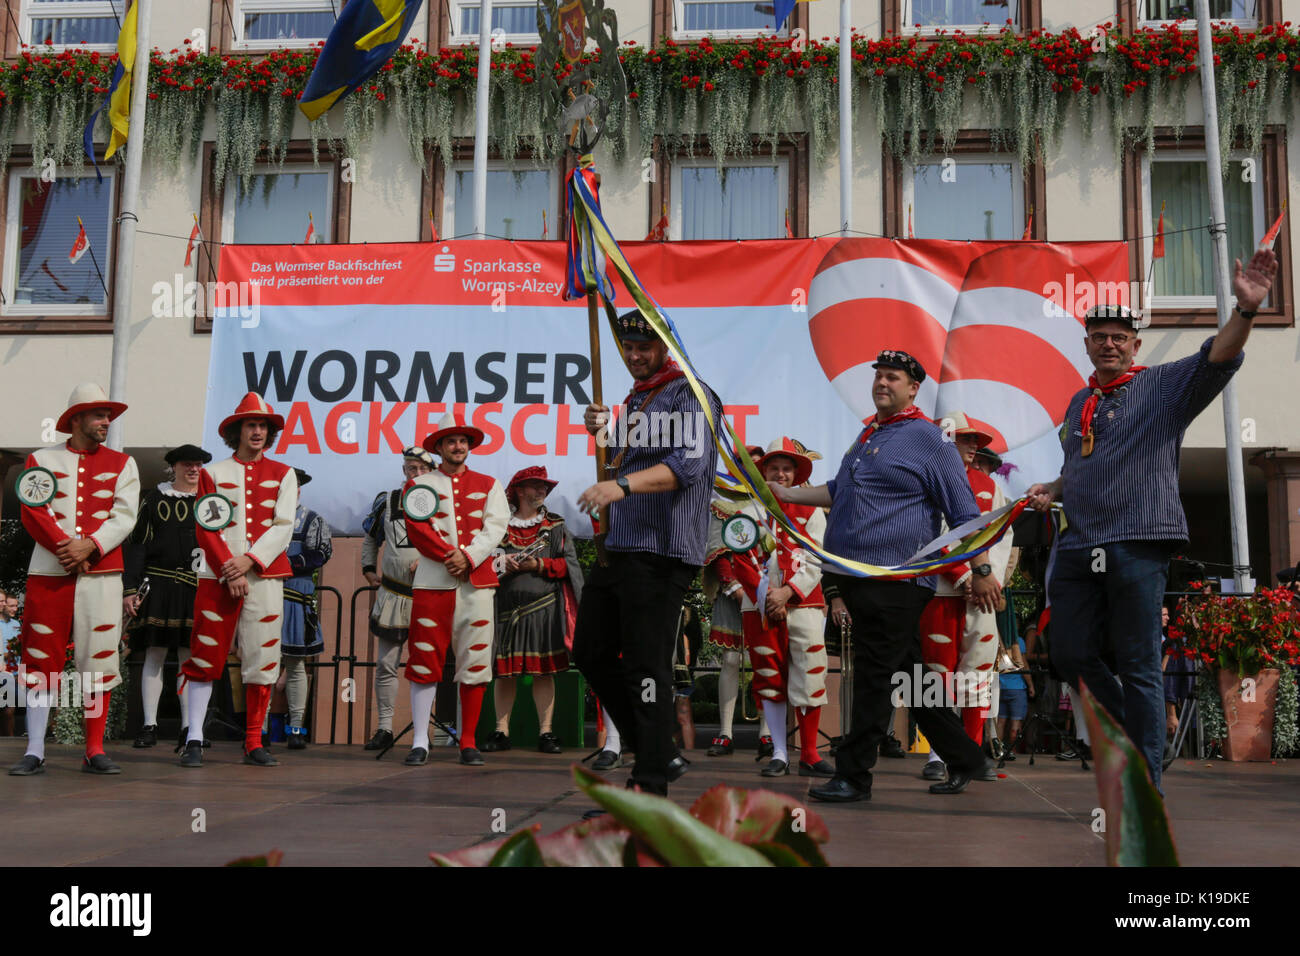 Worms, Germany. 26th August 2017. The representatives of the old fishermen's Guild of Worms come onto the stage. The largest wine and funfair along the Rhine, the Backfischfest started in Worms with the traditional handing over of power from the Lord Mayor to the mayor of the fishermen’s lea. The ceremony was framed by dances and music. Secretary of state Daniela Schmitt from the Rhineland-Palatinate ministry for economy, transport, agriculture and viticulture attended the opening Credit: Michael Debets/Alamy Live News Stock Photo